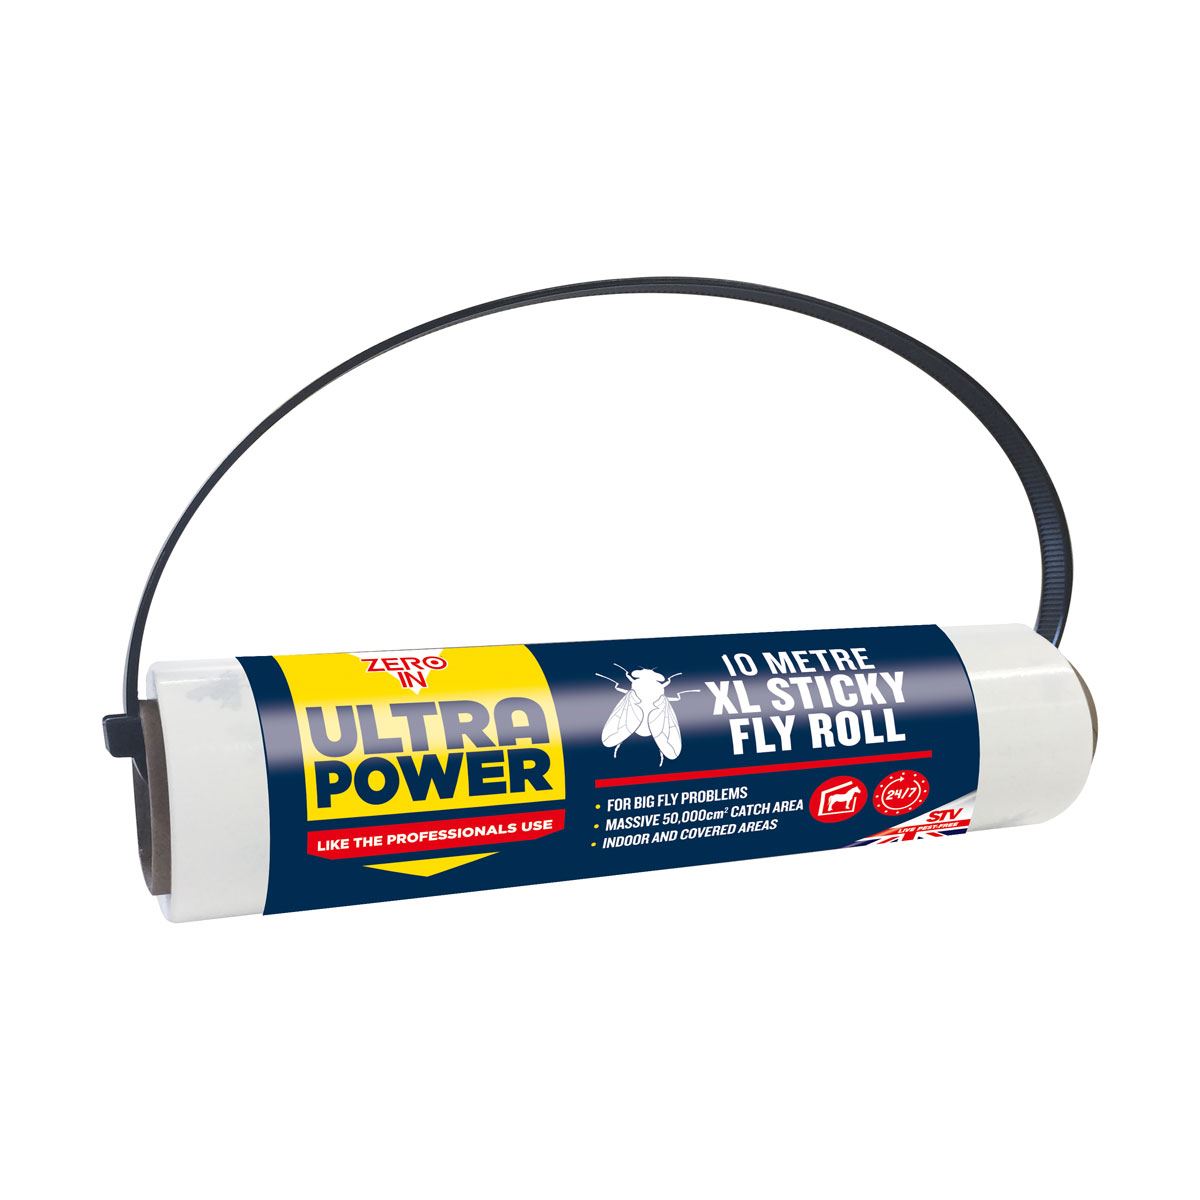 Zero In Ultra Power Sticky Fly Roll - Just Horse Riders